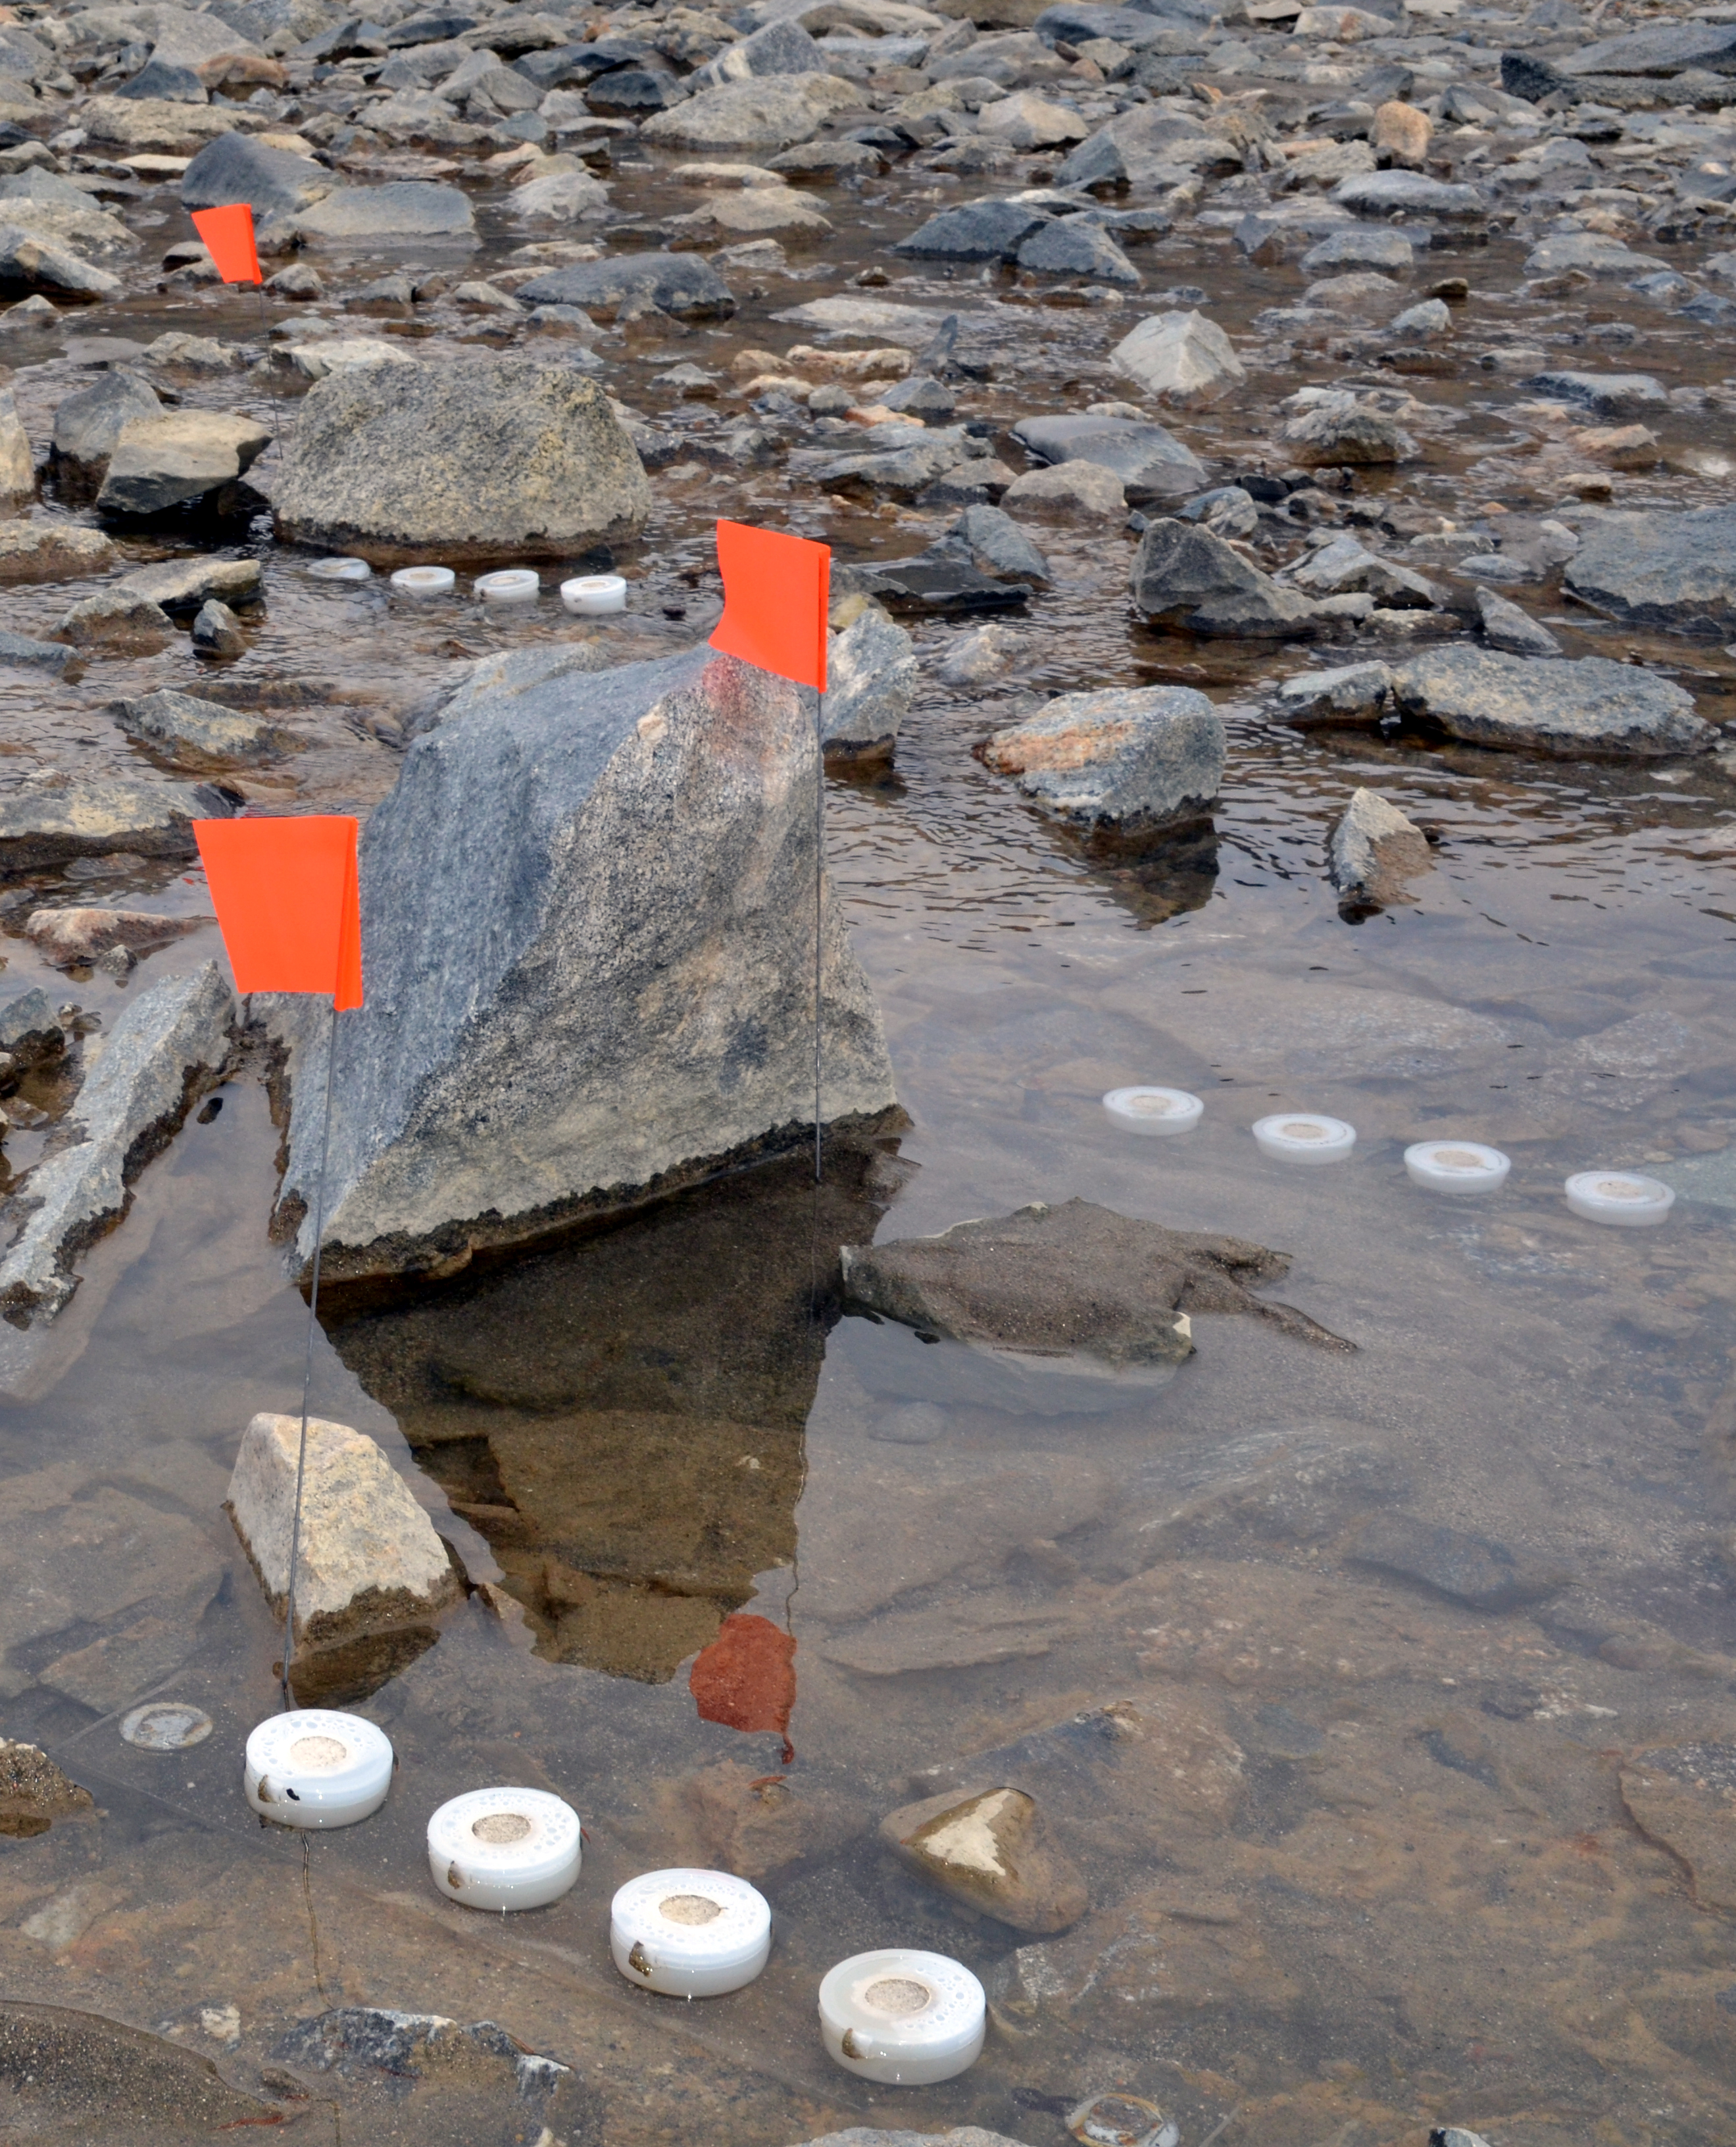 Small flags and cups sit in a stream.